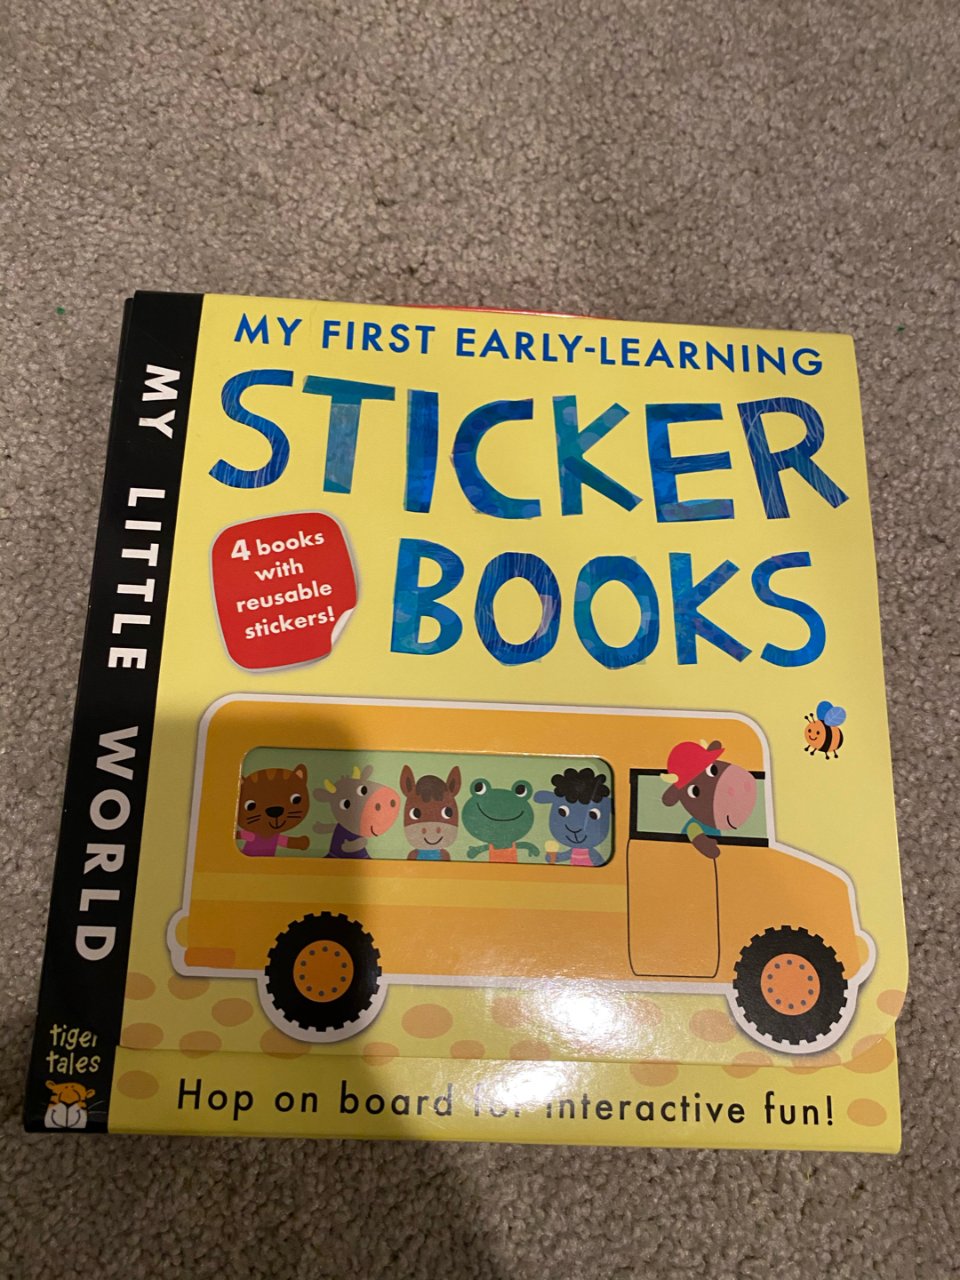 toddler activity,Target 塔吉特百货,My First Early-Learning Sticker Books - 